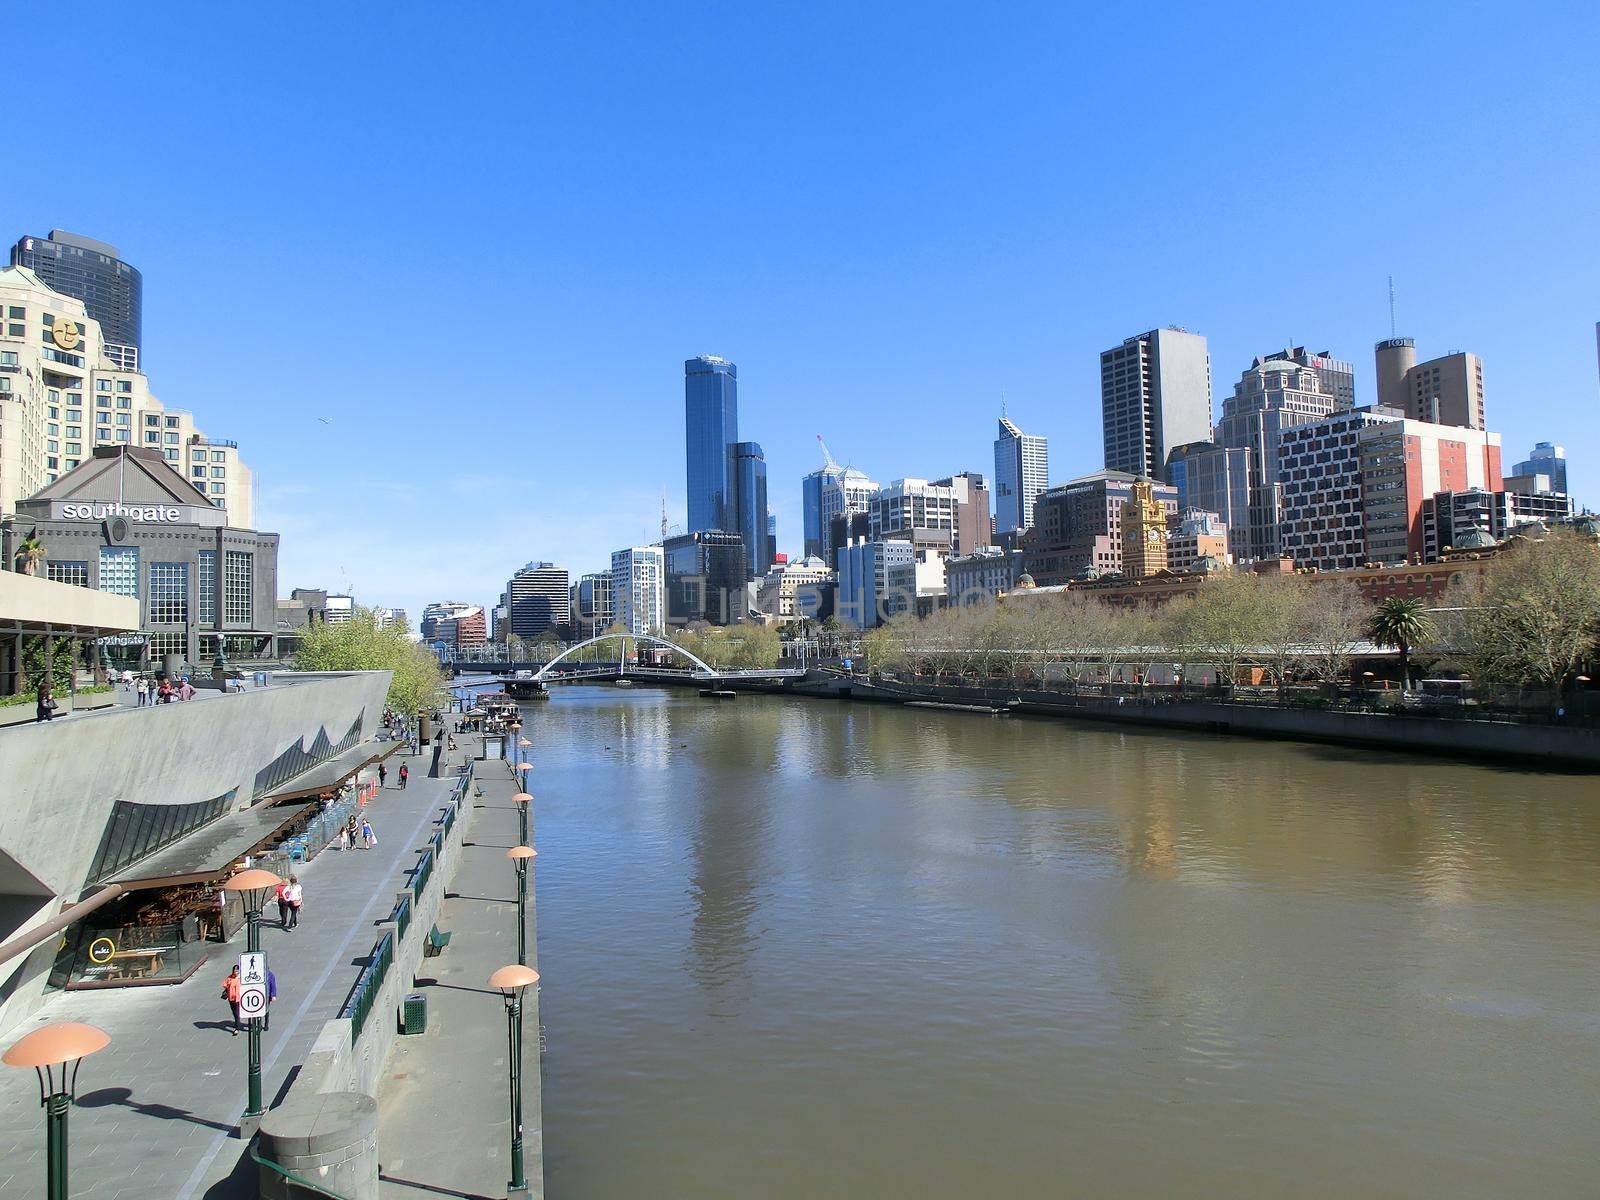 A view of the Yarra River, Melbourne, Victoria, Australia by bettercallcurry